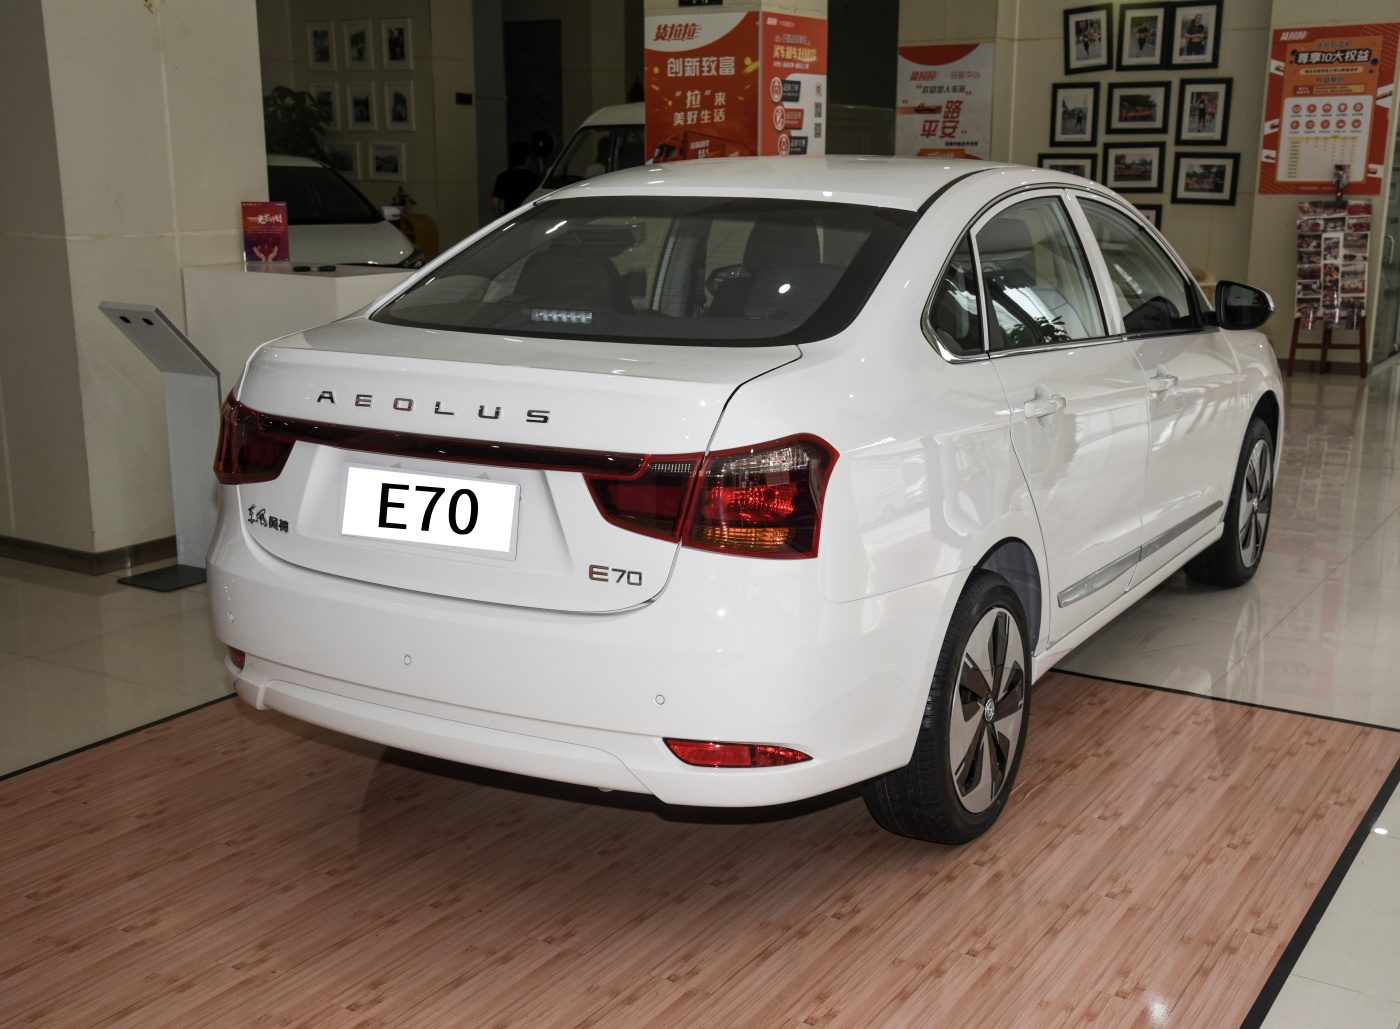 Used Car Dongfeng Aeolus E70 New Energy Pure Electric Vehicle EV Car in Stock - E70 - 5